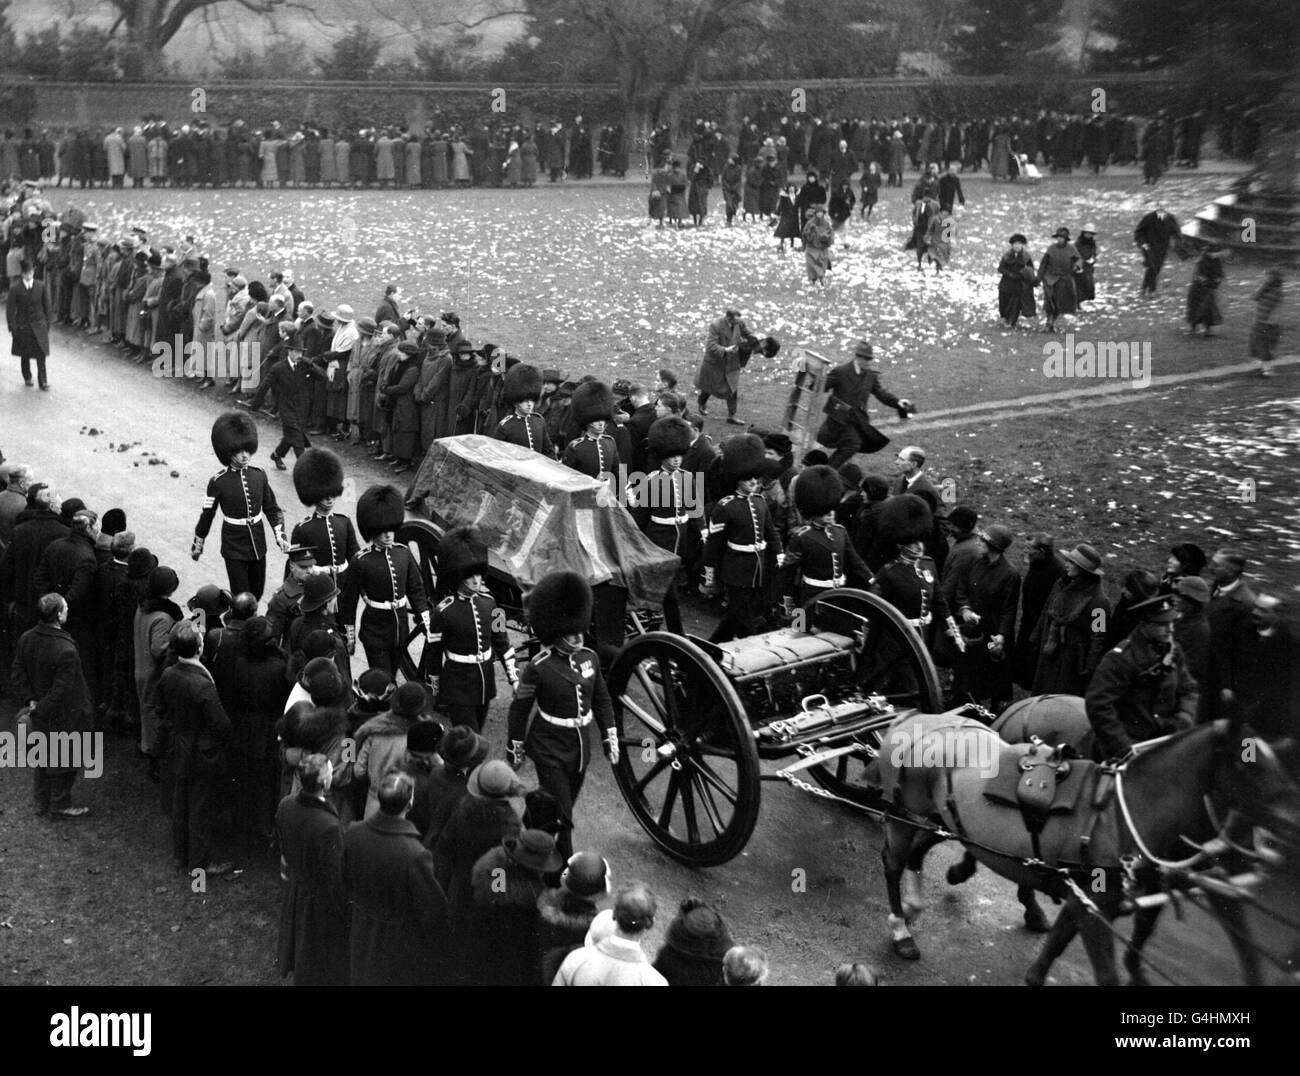 The funeral of Queen Alexandra, wife of King Edward VII: A general view of Queen Alexandra's funeral cortege showing her coffin on a gun carriage, her Guards Escort and the crowd as the cortege leaves Sandringham, Norfolk. Stock Photo